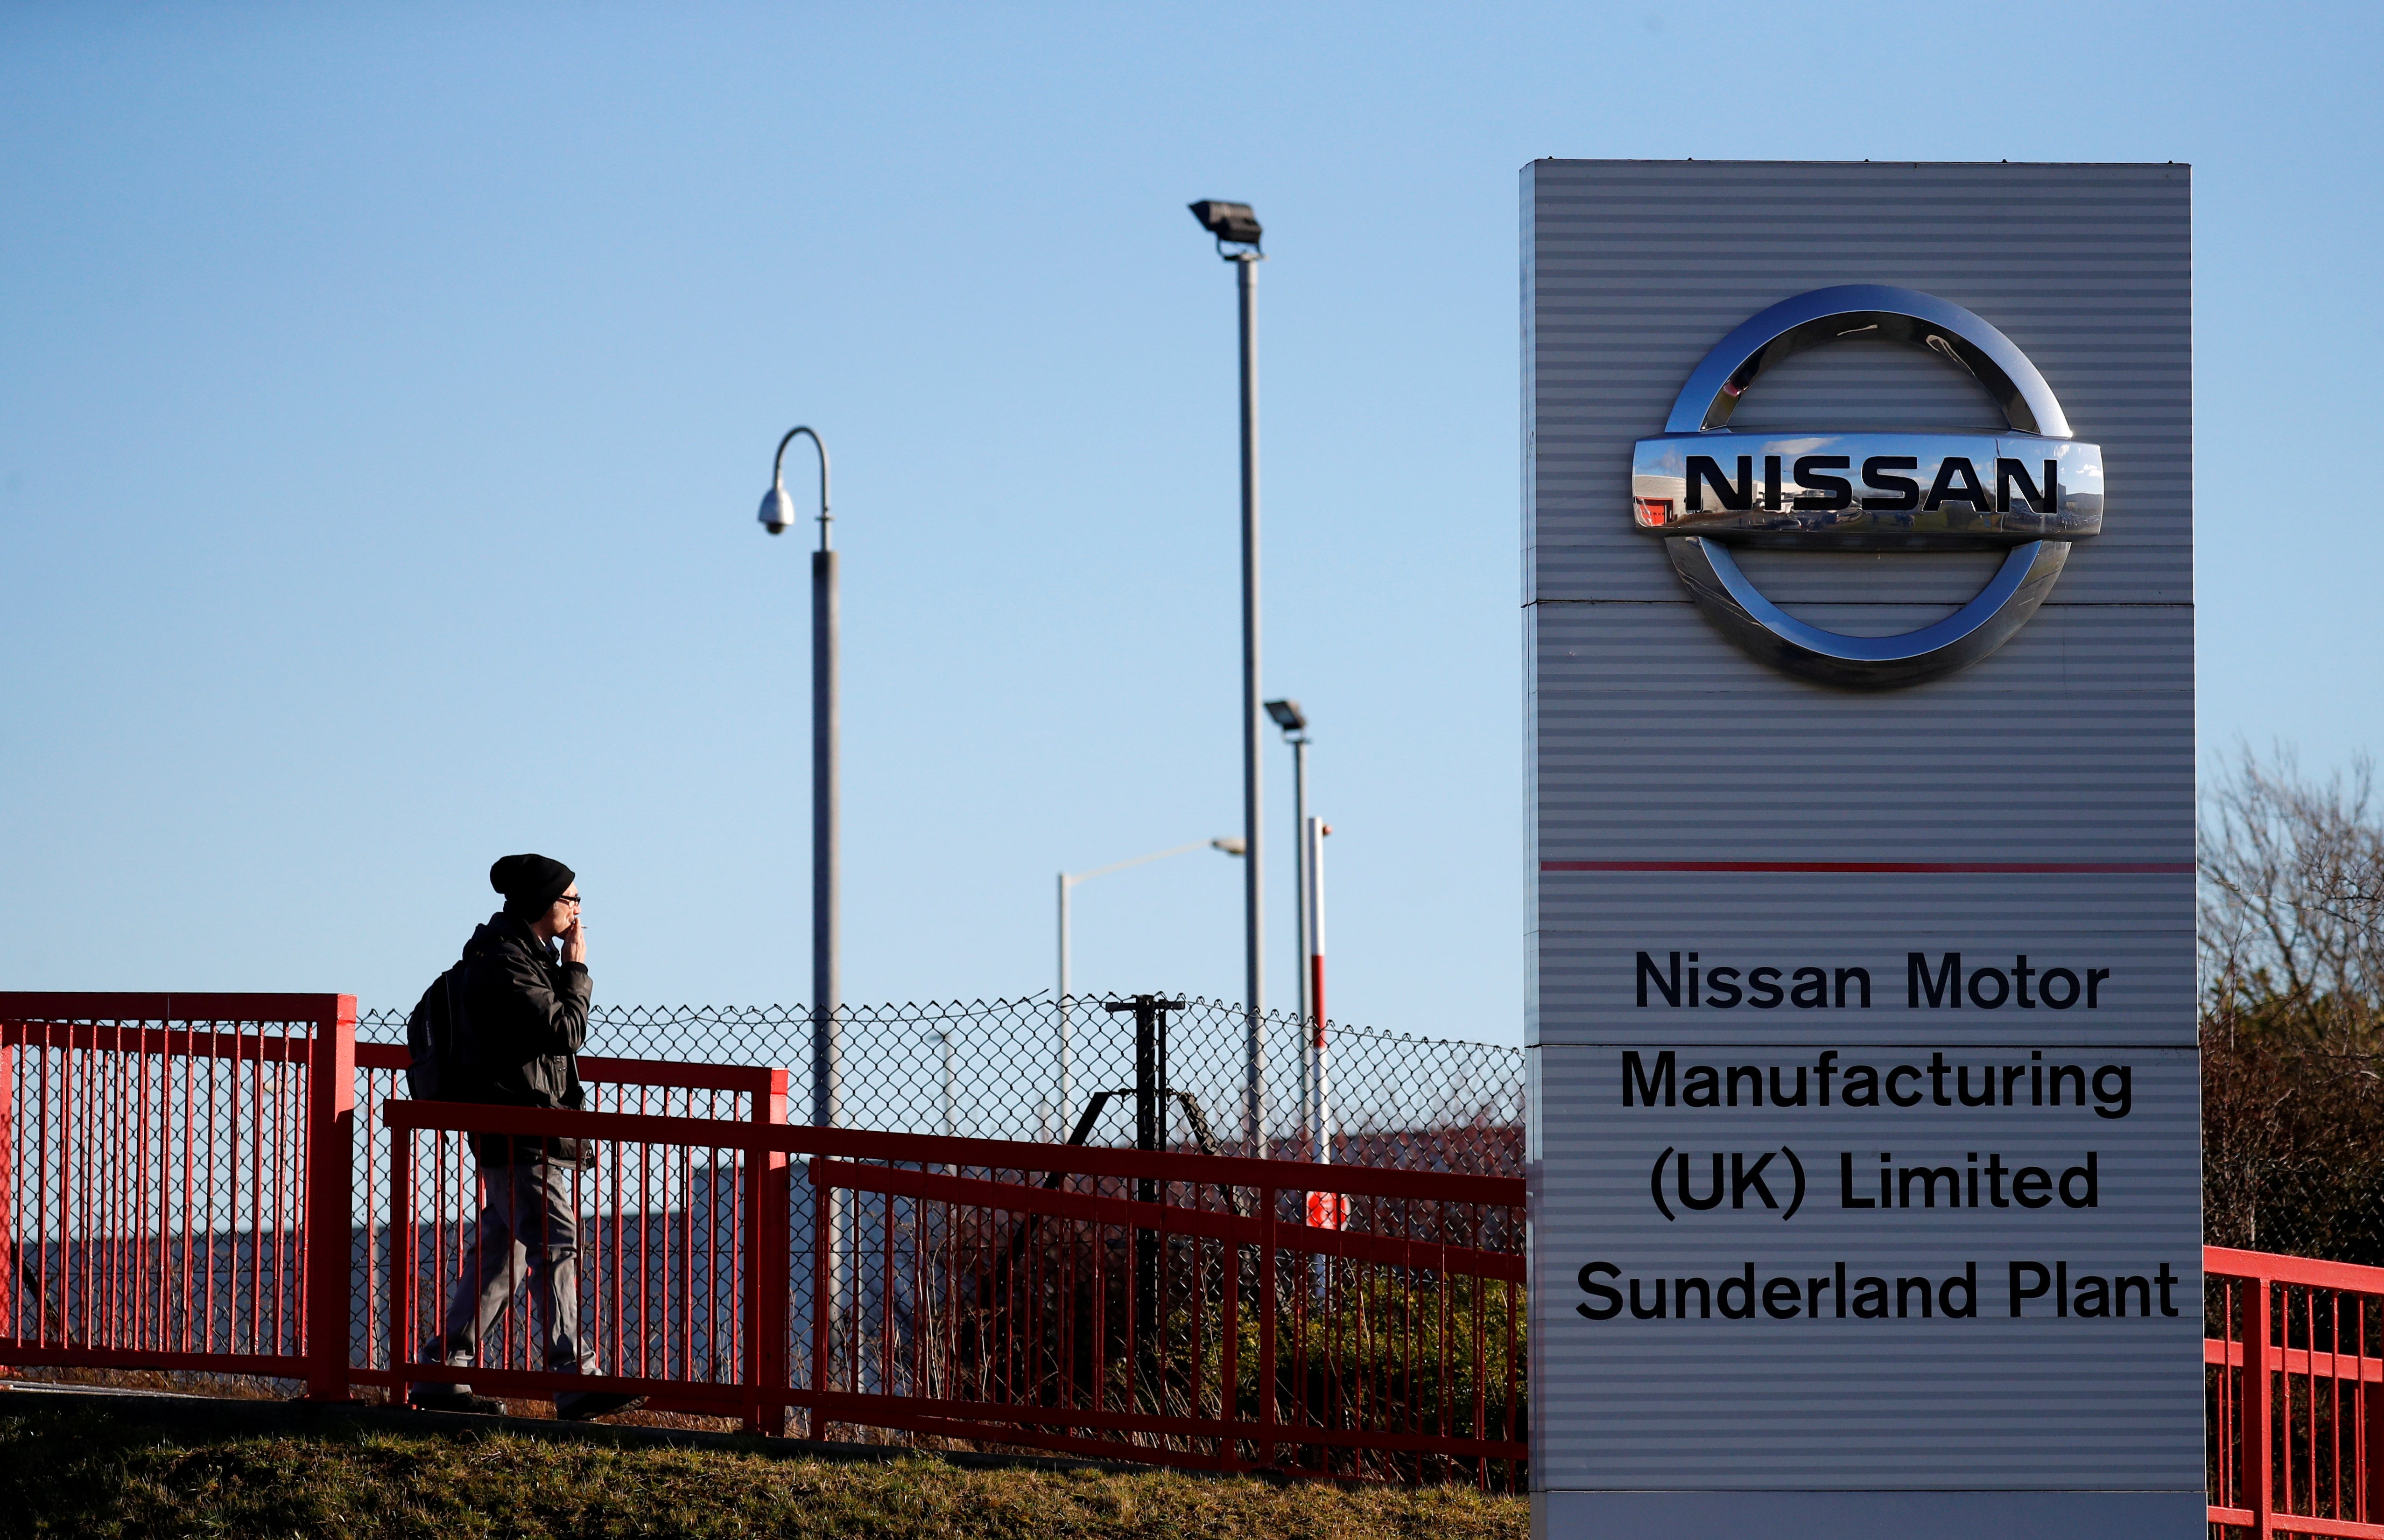 Nissan is said to be asking the government